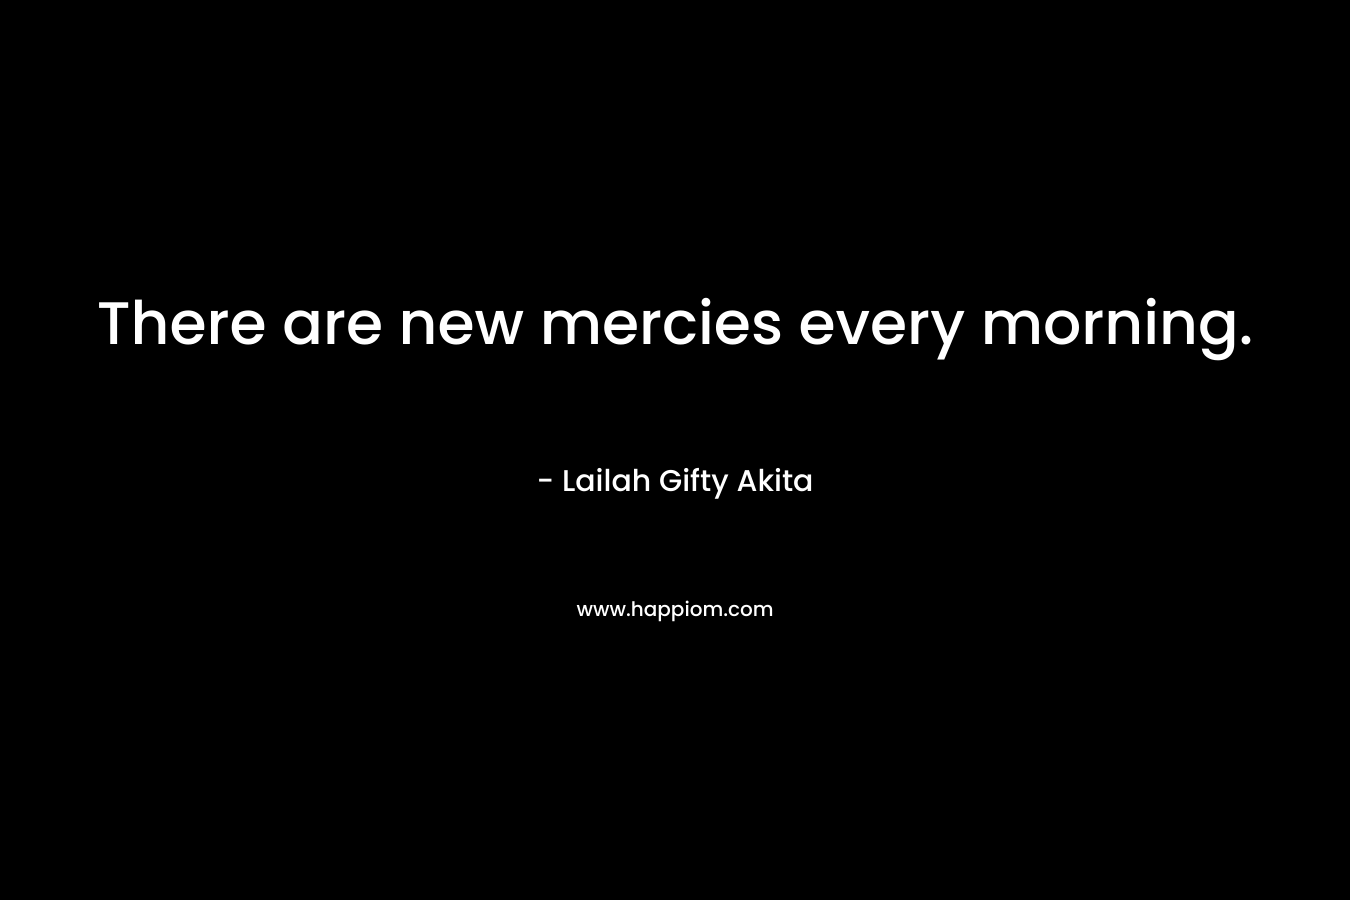 There are new mercies every morning.